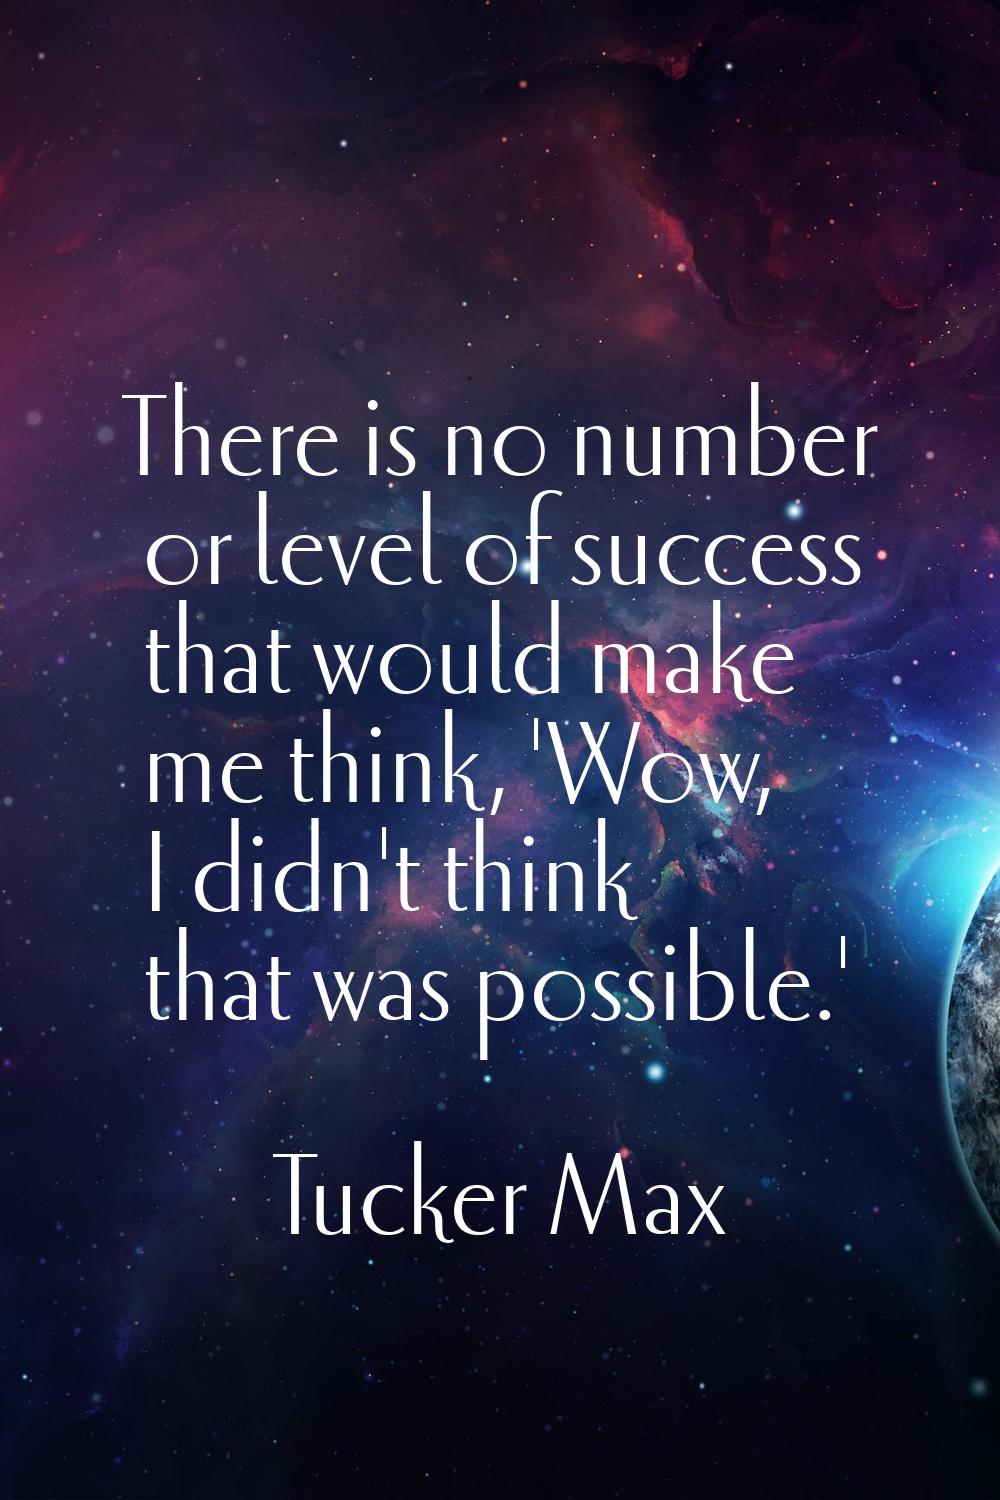 There is no number or level of success that would make me think, 'Wow, I didn't think that was poss